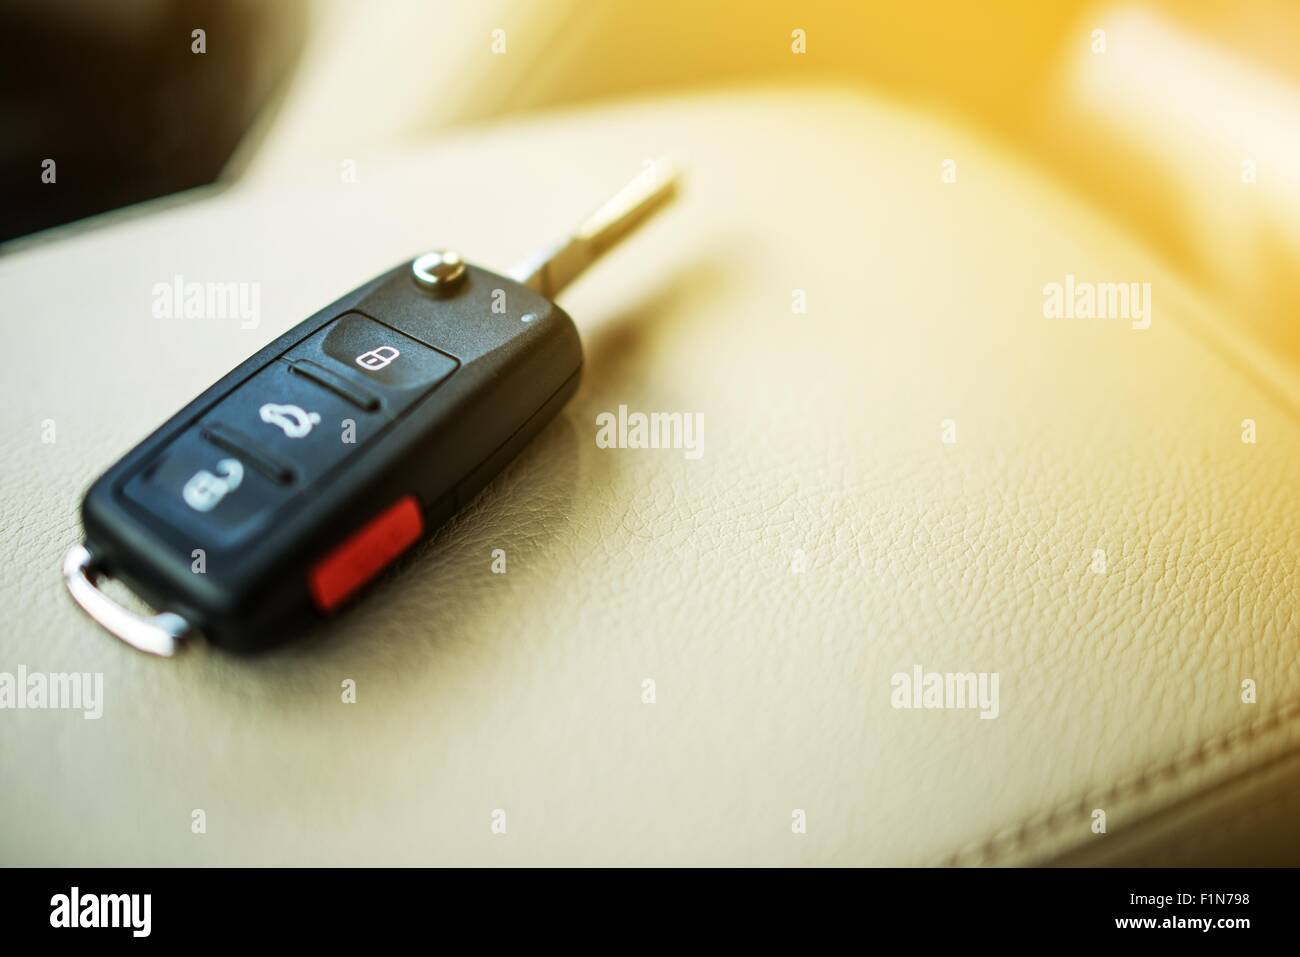 Brand New Car Keys on Leather Closeup. Cars Industry Concept. Stock Photo